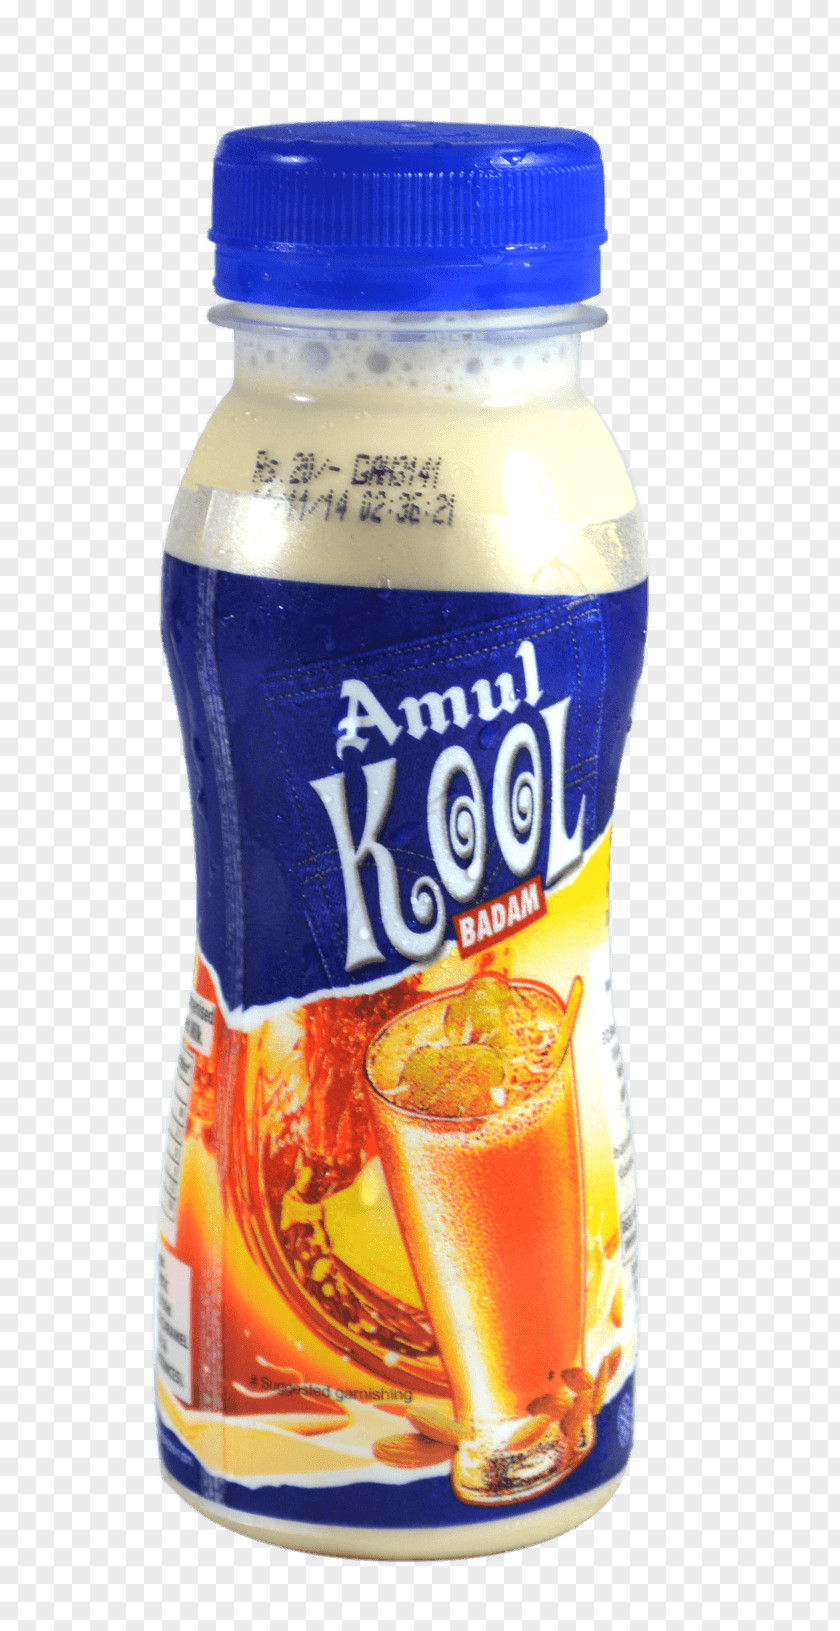 Paper Boat Juice Fizzy Drinks Almond Milk Flavored Amul PNG